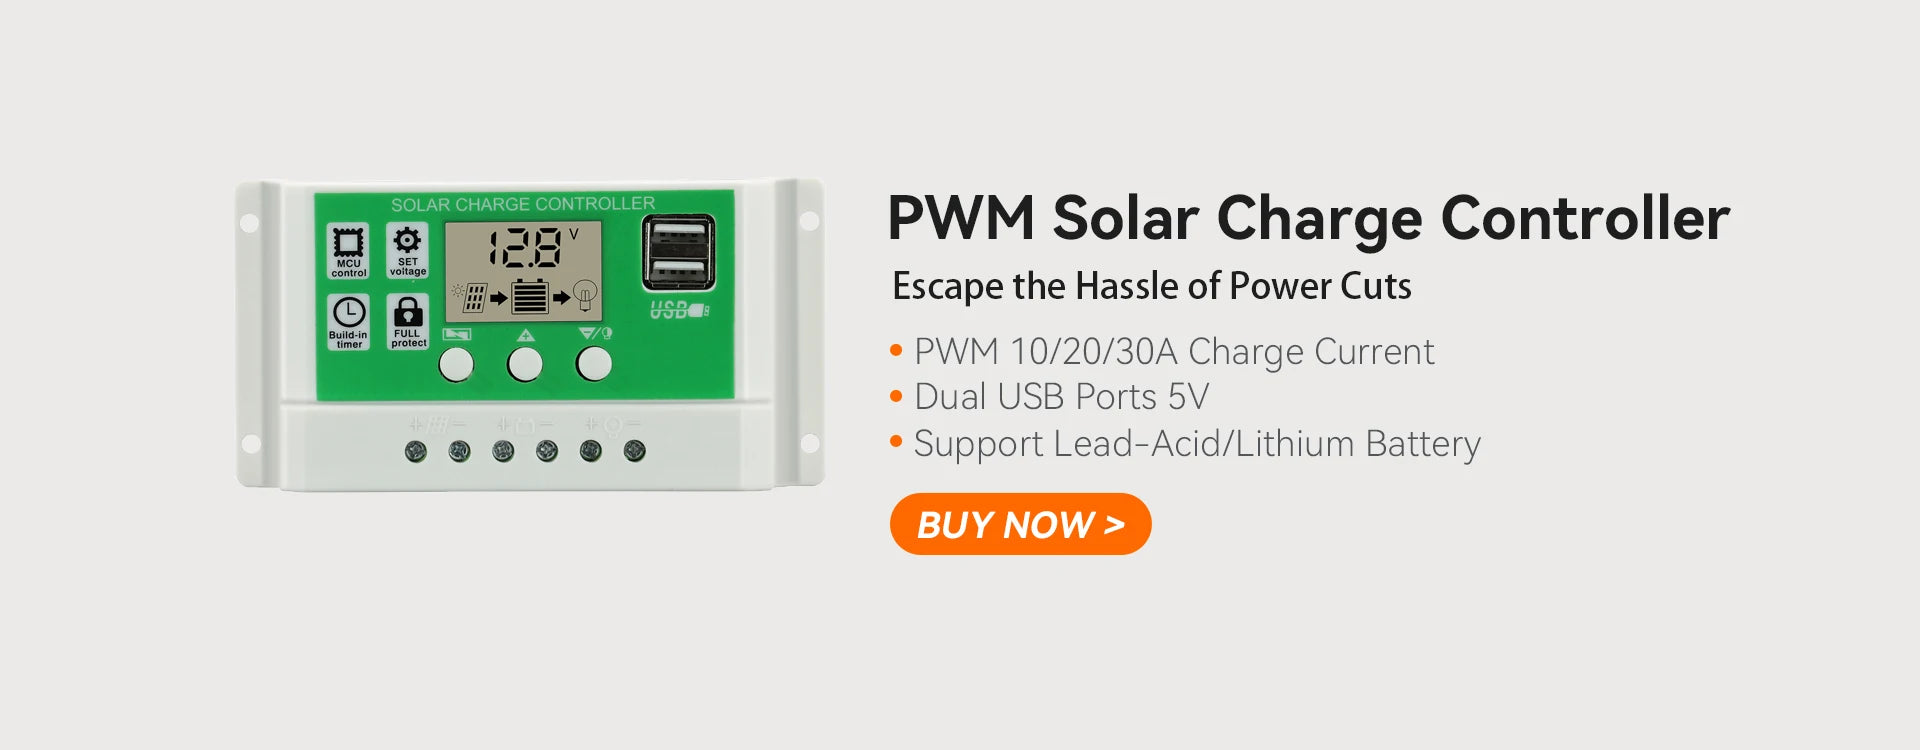 40A 50A 60A Solar Panel Charge Controller, Efficient solar charger with built-in protection, suitable for lead-acid and lithium batteries, with dual USB ports.